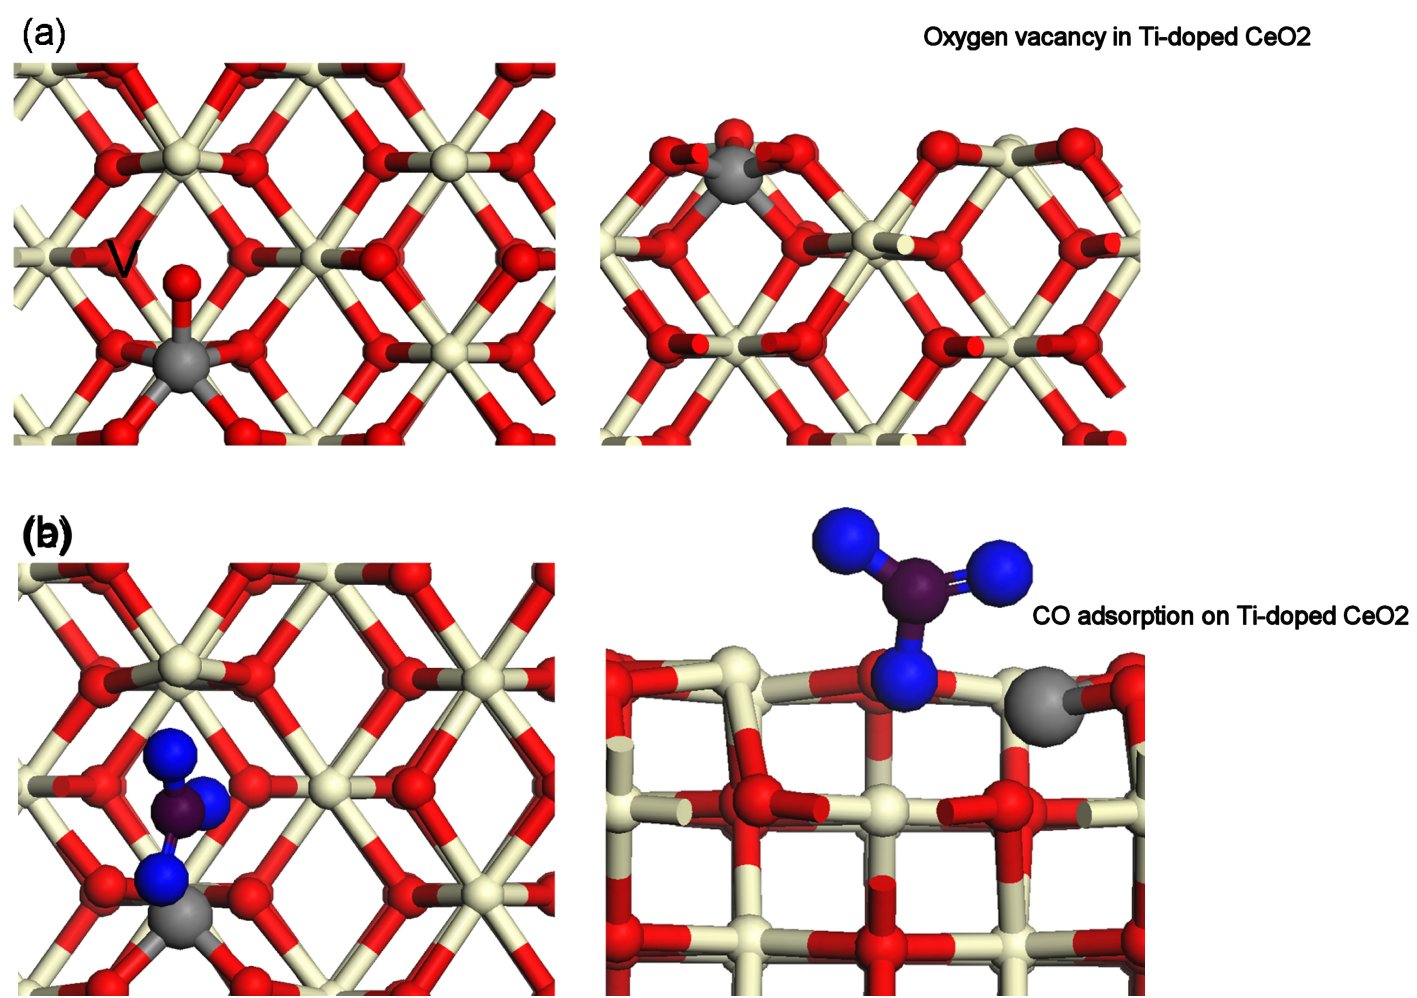  (a): Oxygen vacancy in Ti-doped CeO2 (110) surface. (b): CO adsorption at Ti-doped CeO2.